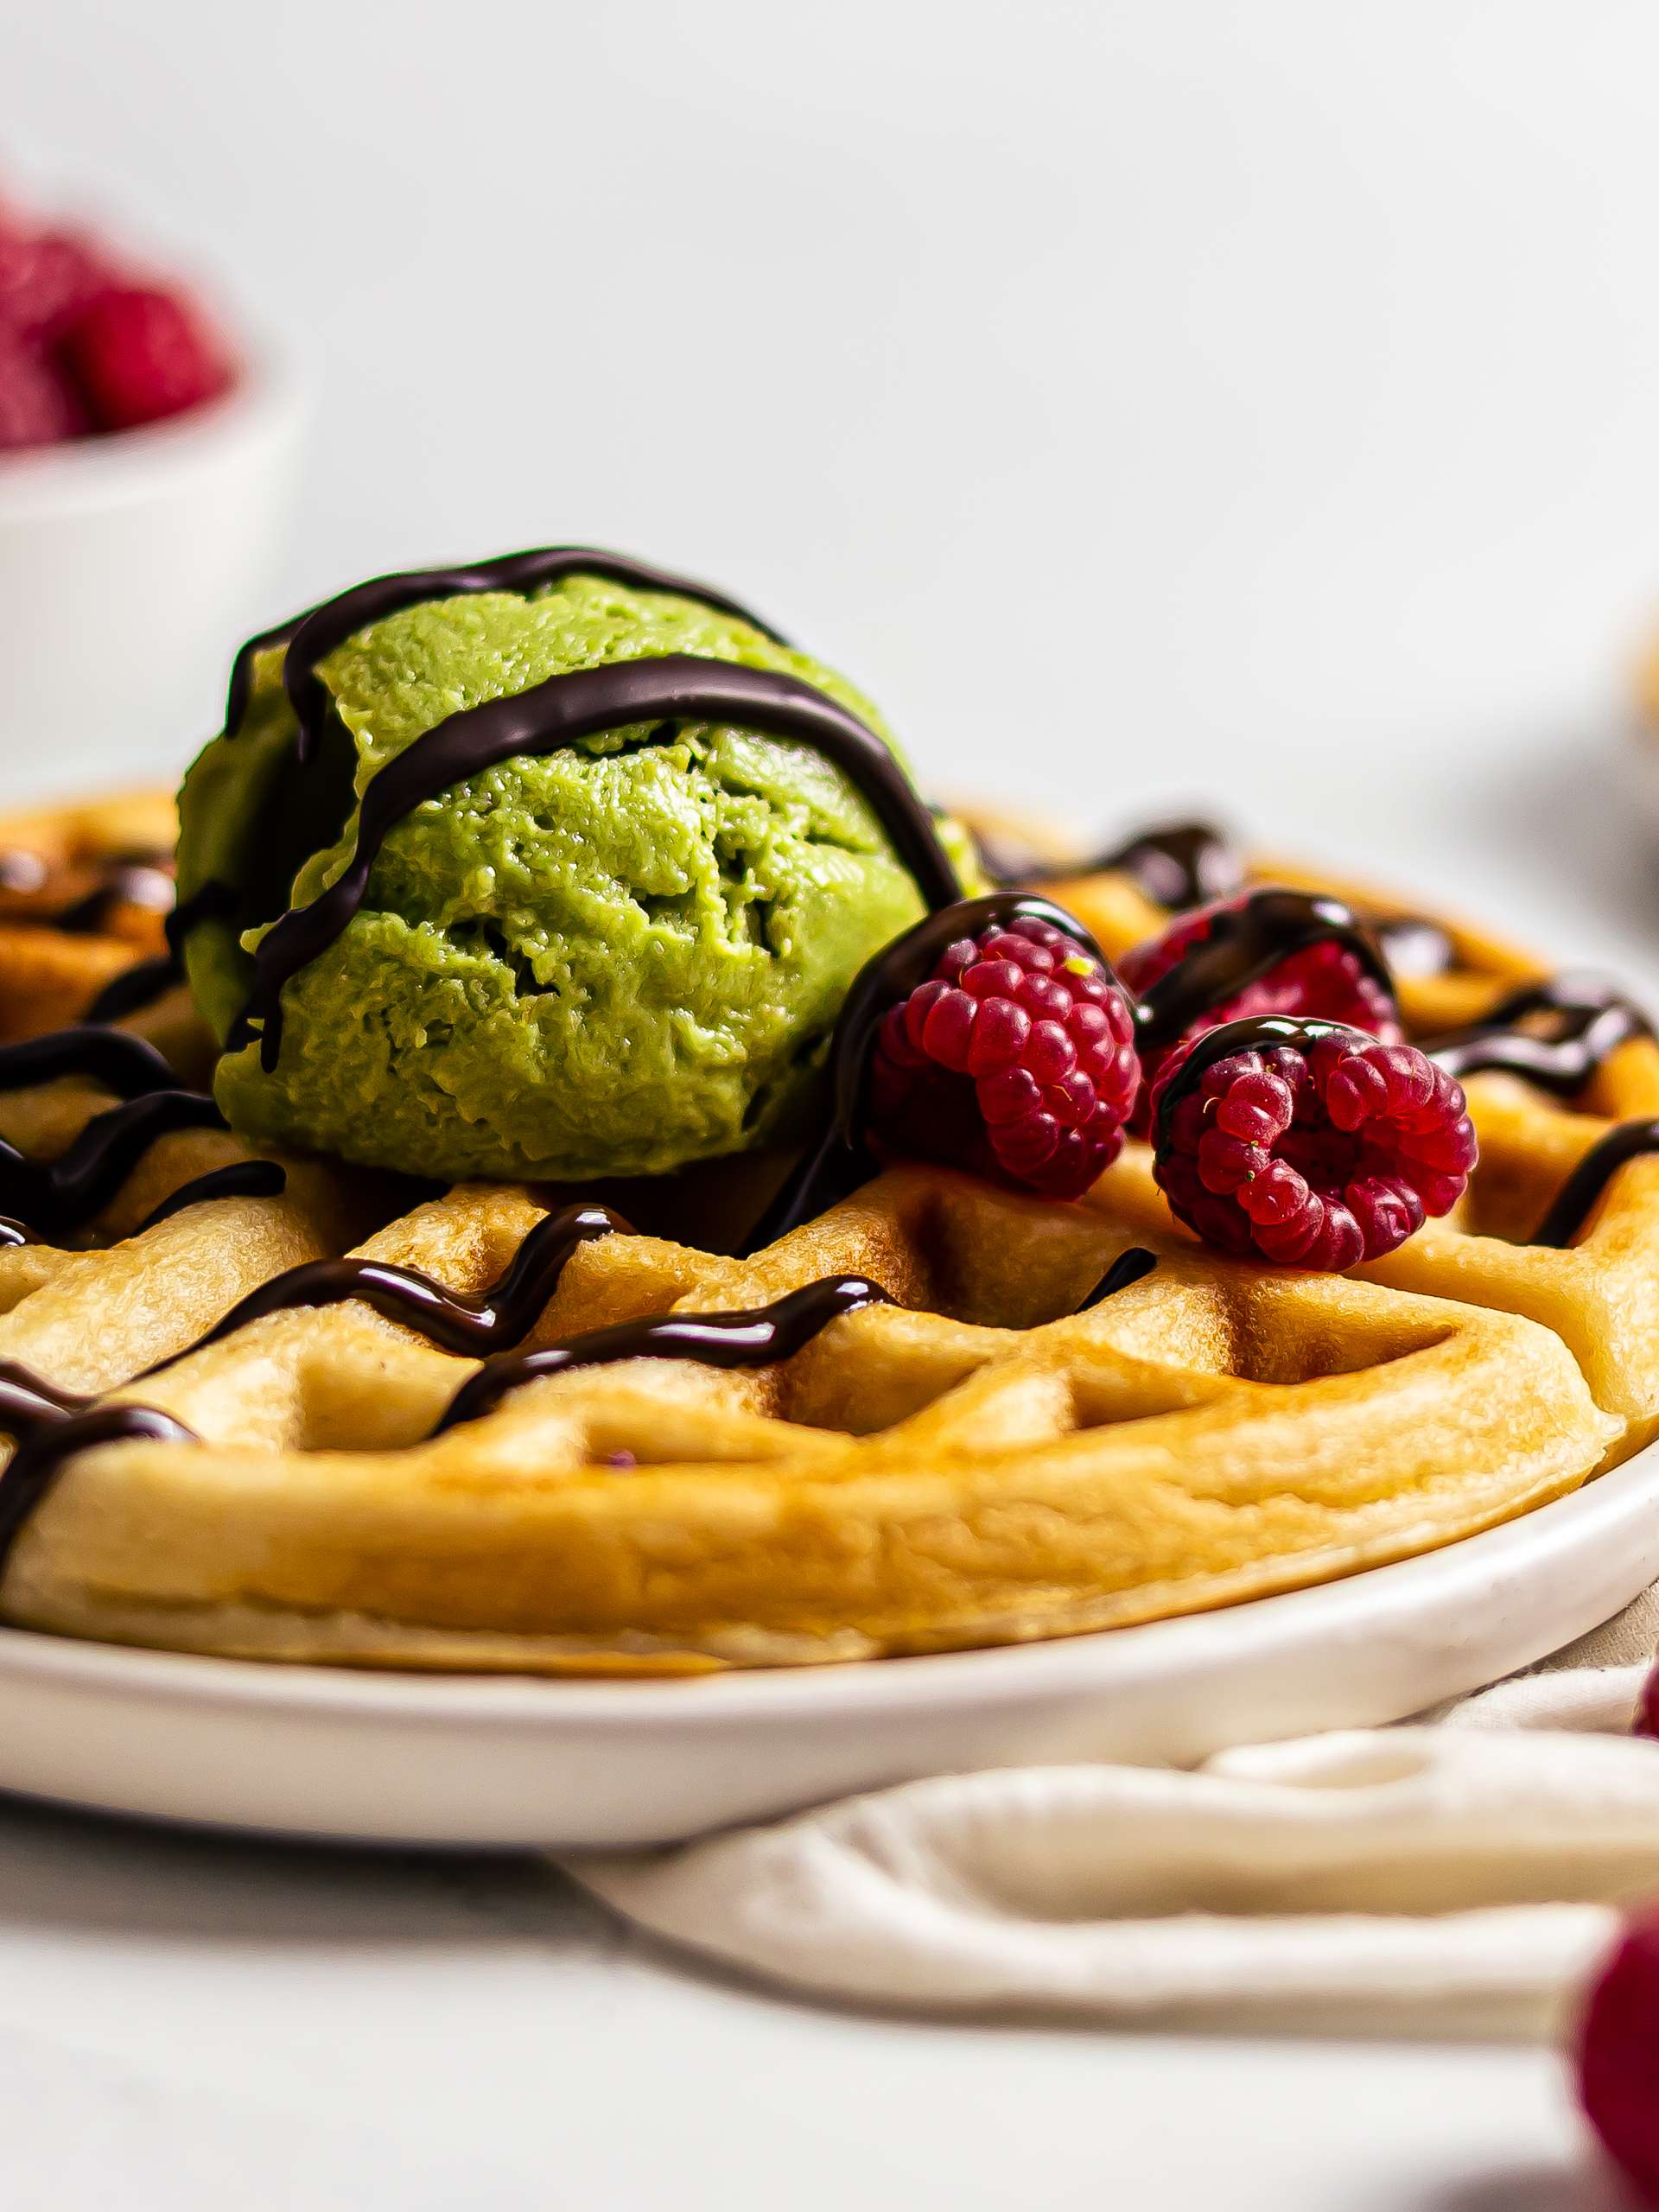 mochi waffles topped with matcha ice cream and berries